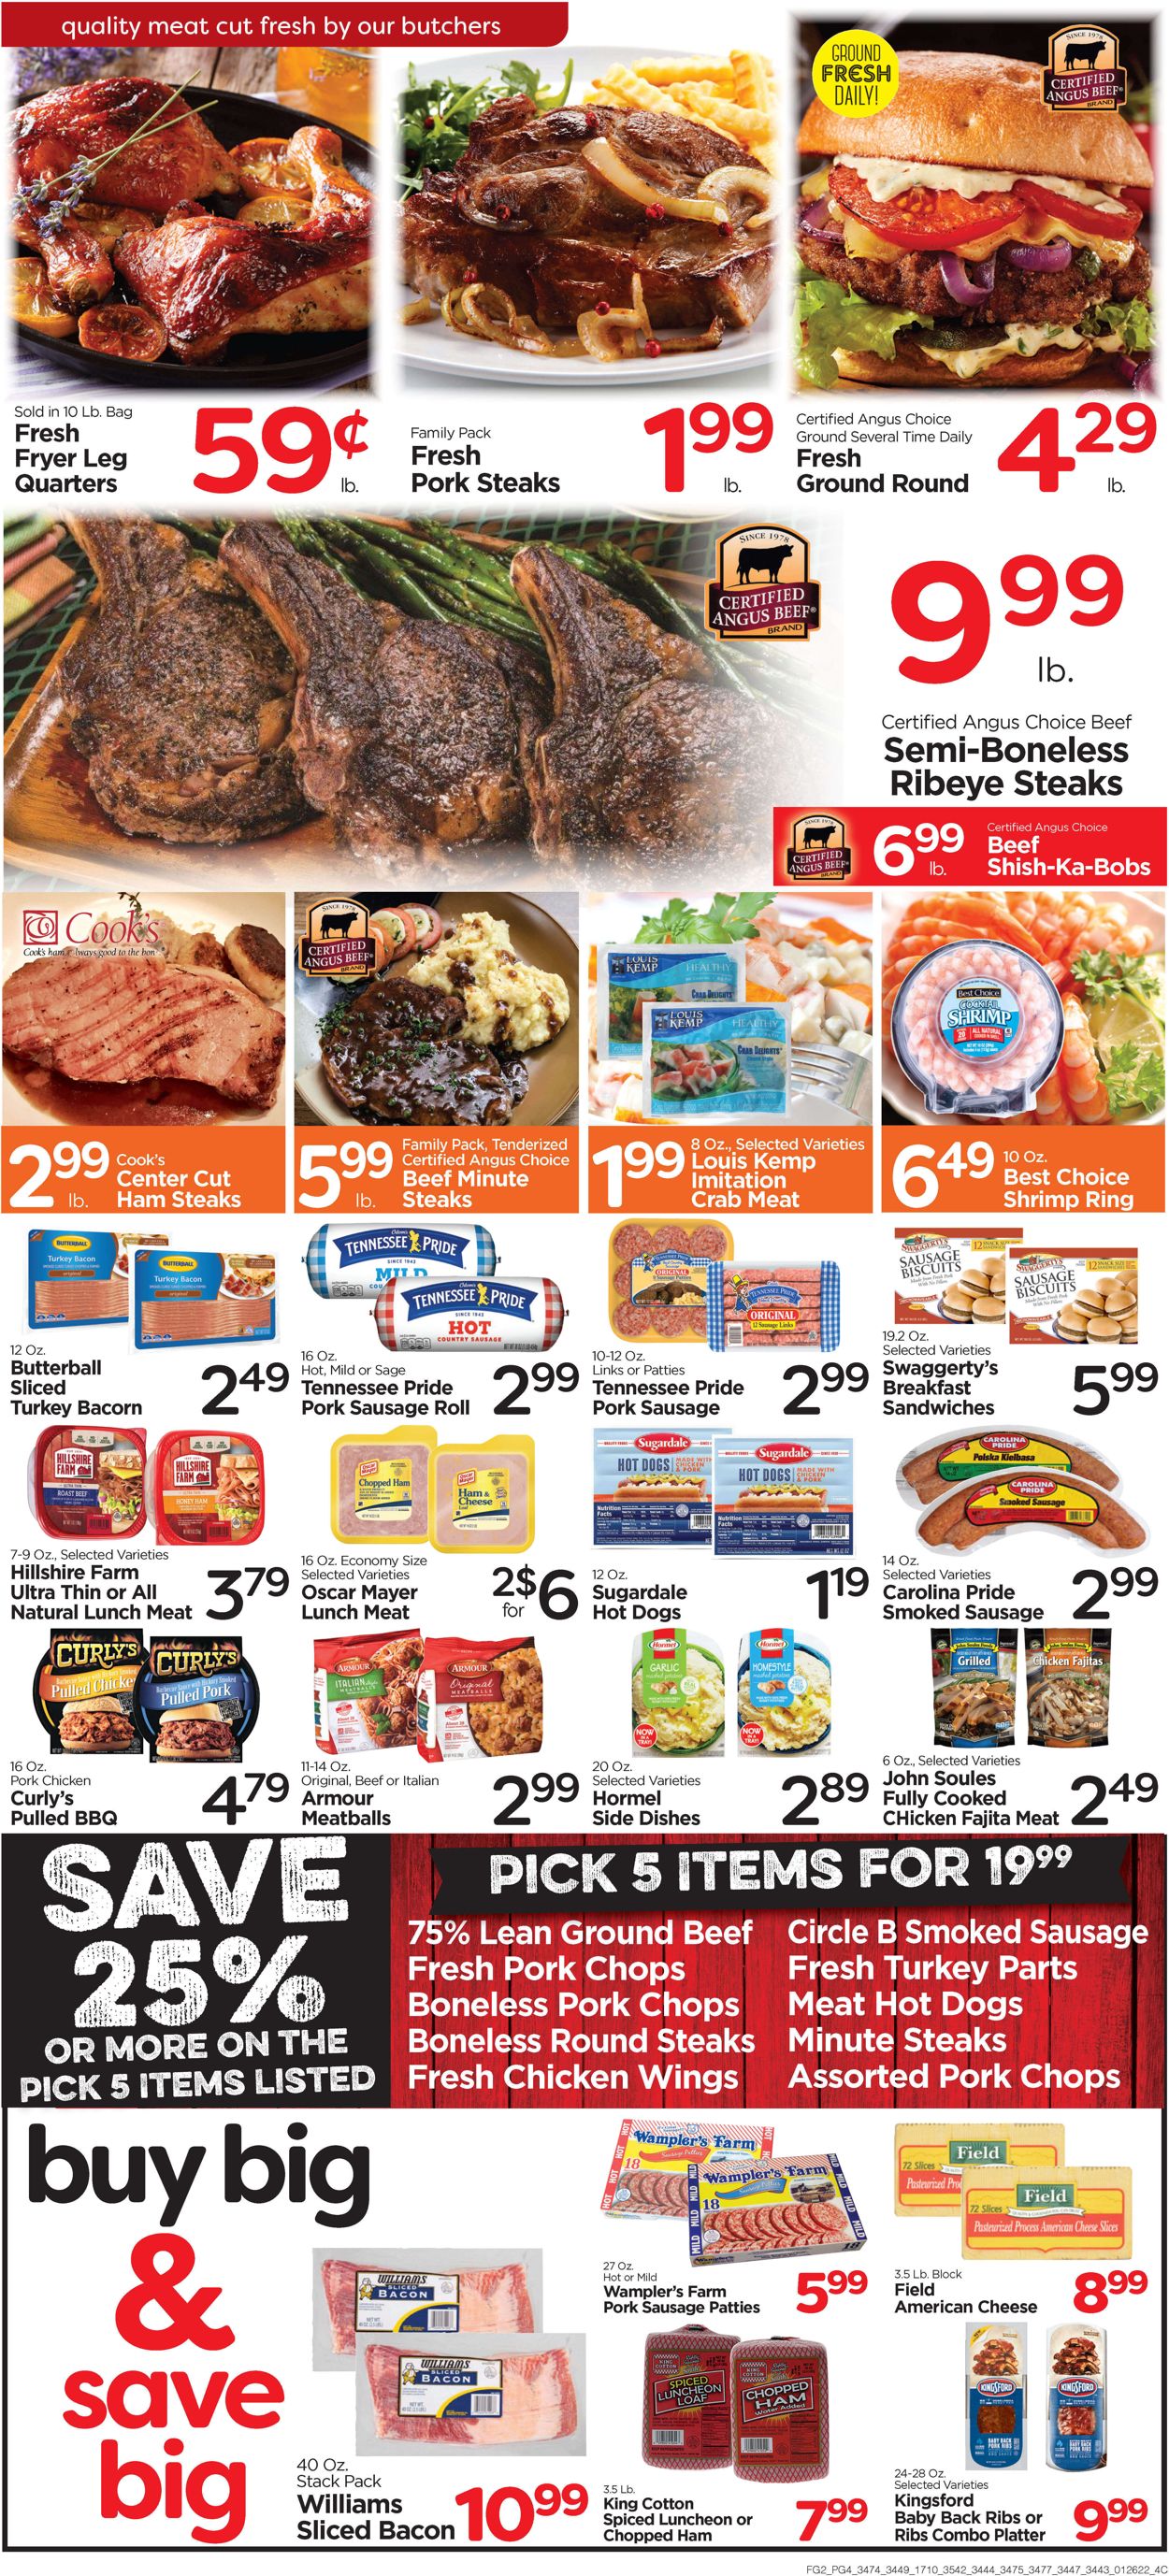 Catalogue Edwards Food Giant from 01/26/2022